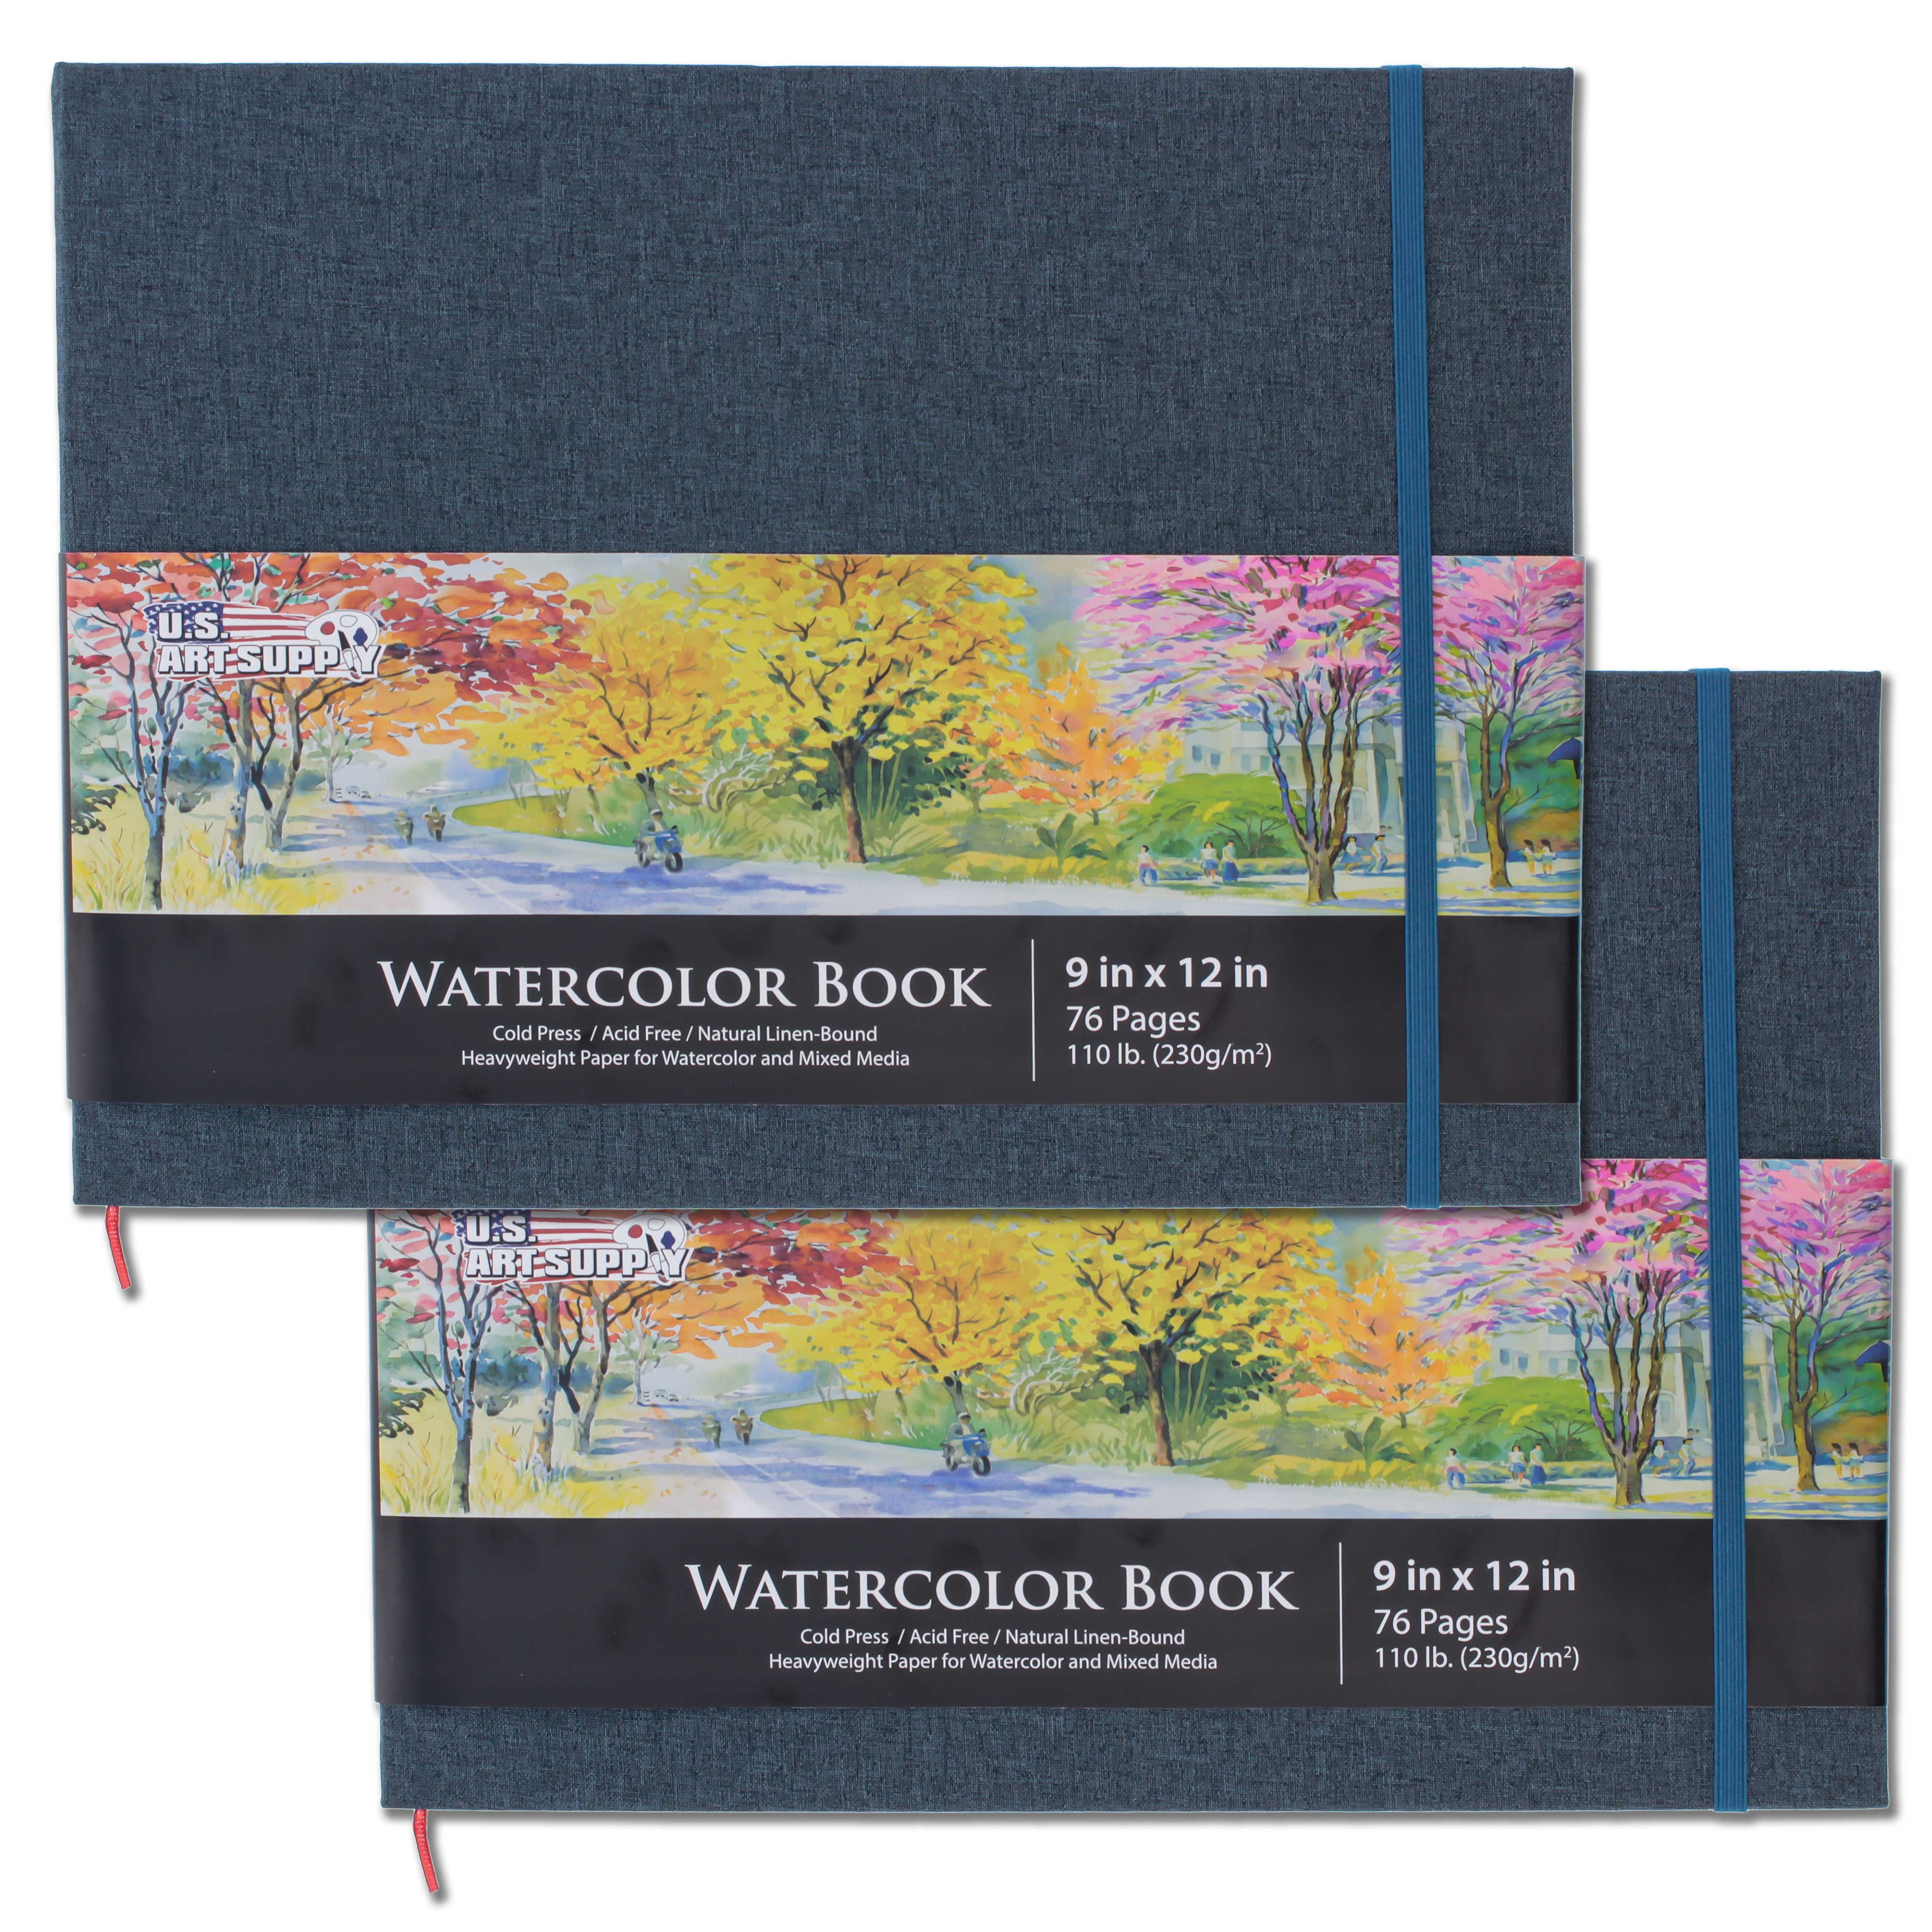 U.S. Art Supply 9 x 12 Watercolor Book, 2 Pack, 76 Sheets, 110 lb (230 Gsm) - Linen-Bound Hardcover Artists Paper Pads - Acid-free, Cold-Pressed, BR